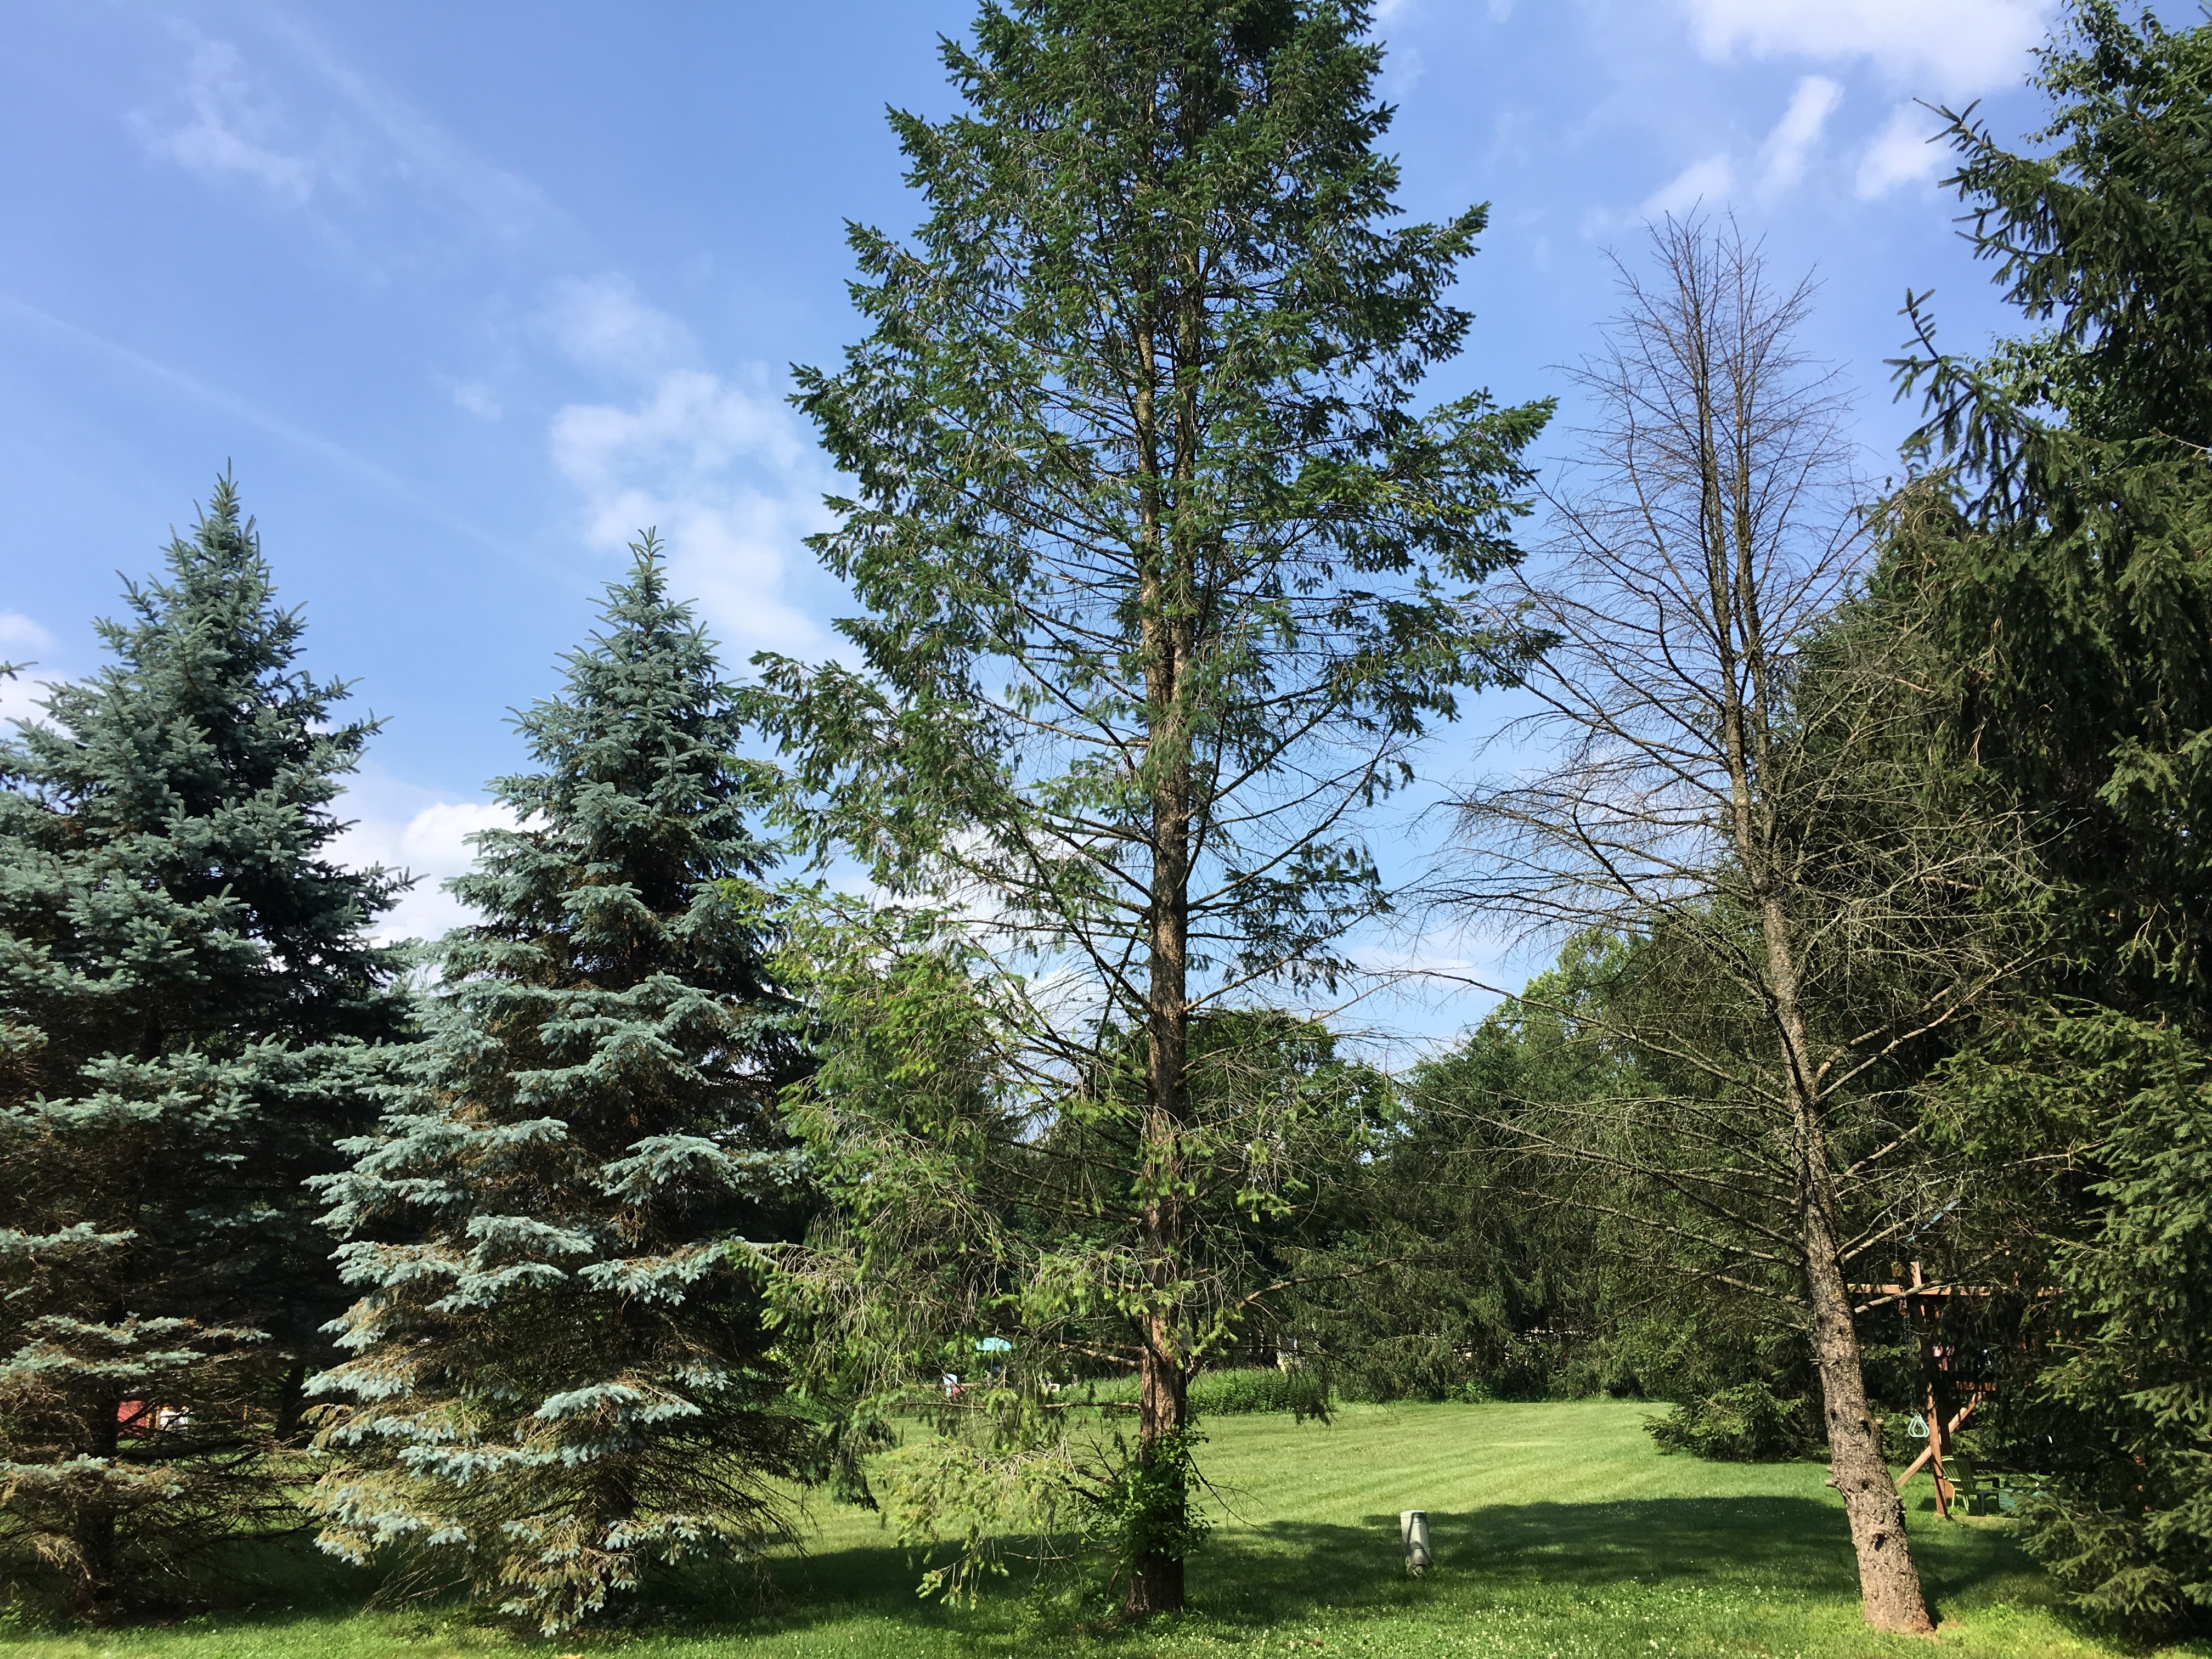 Pine tree lost all its needles. - Ask an Expert